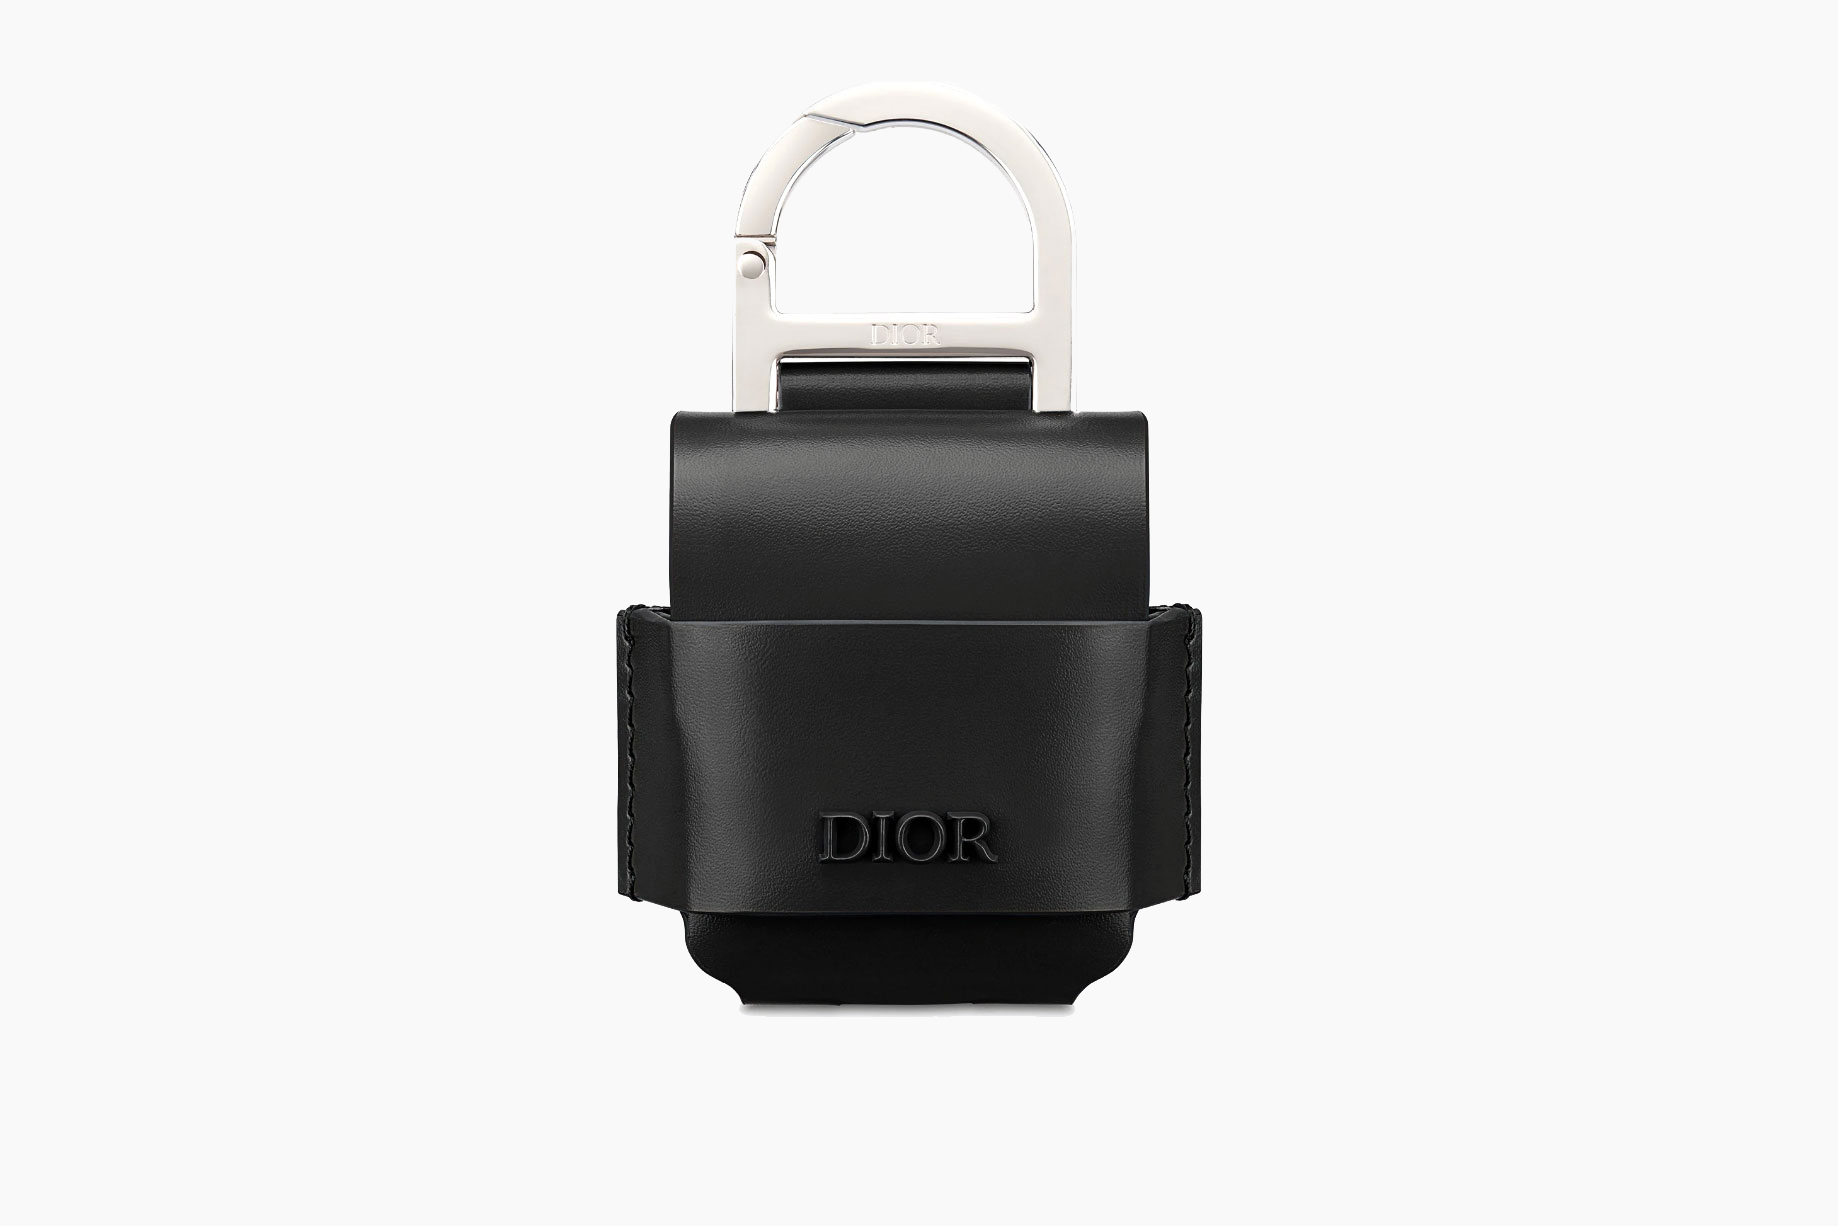 Live your ultimate bougie life with this $560 Dior AirPod case